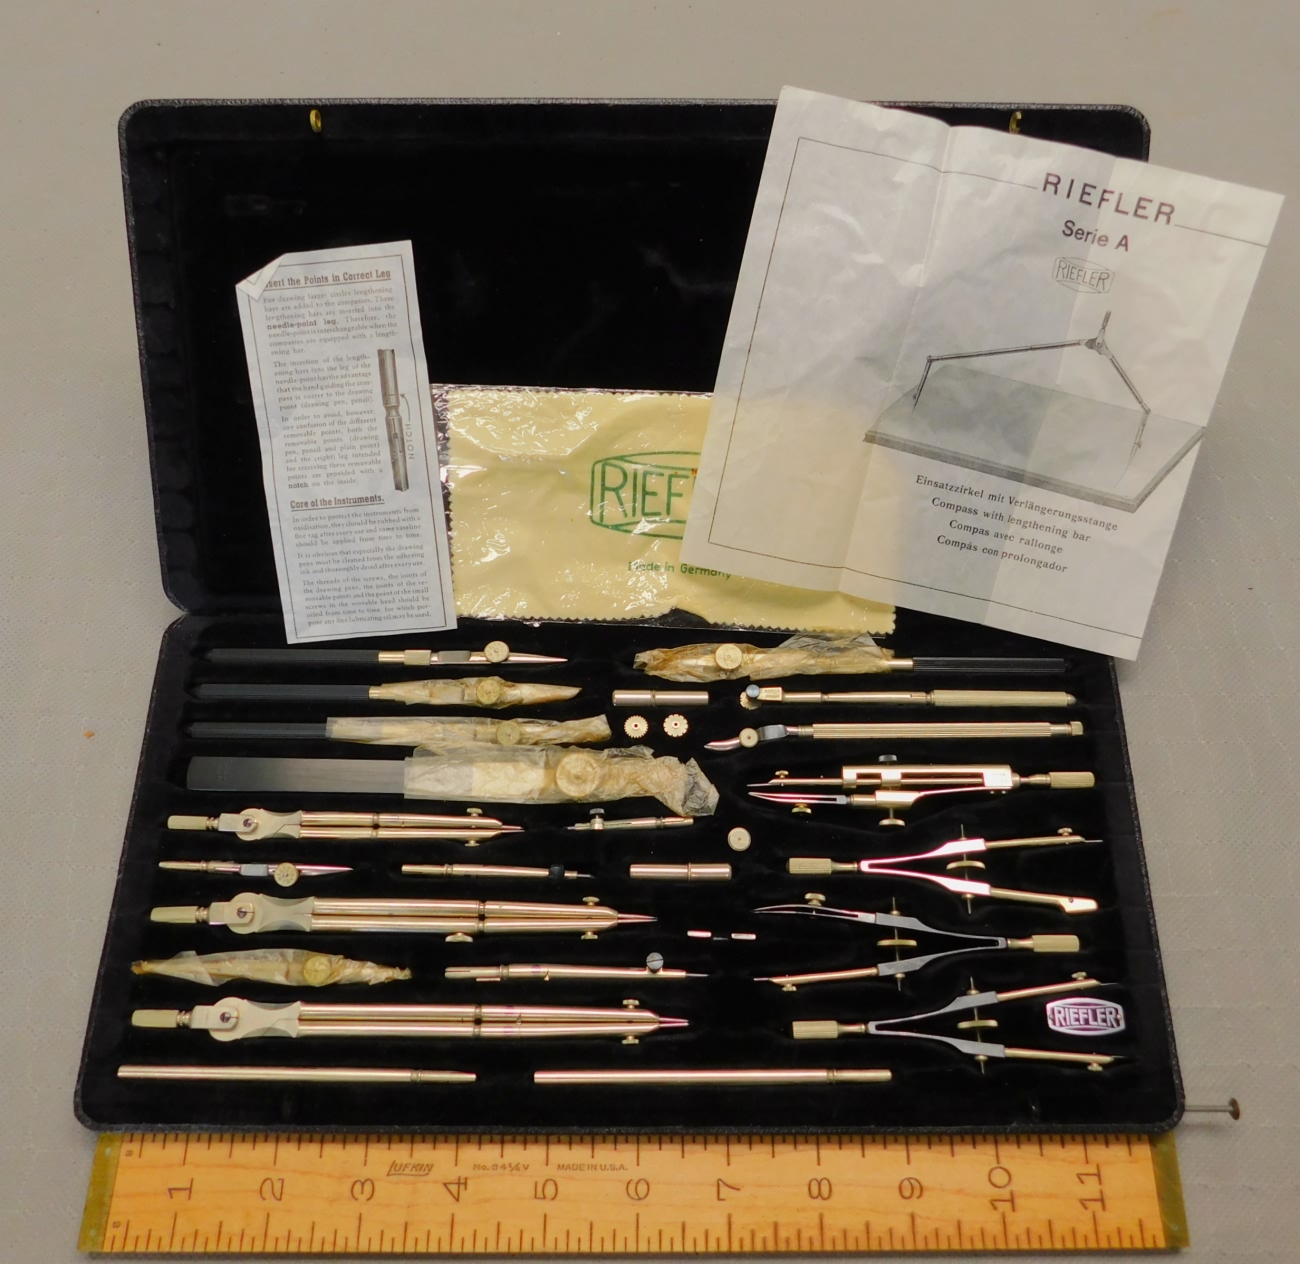 Vintage Drafting Lettering Set, K&E Leroy Complete Set, Includes Ink and  Pens, Full Set and Case Restored Condition, FREE SHIPPING 